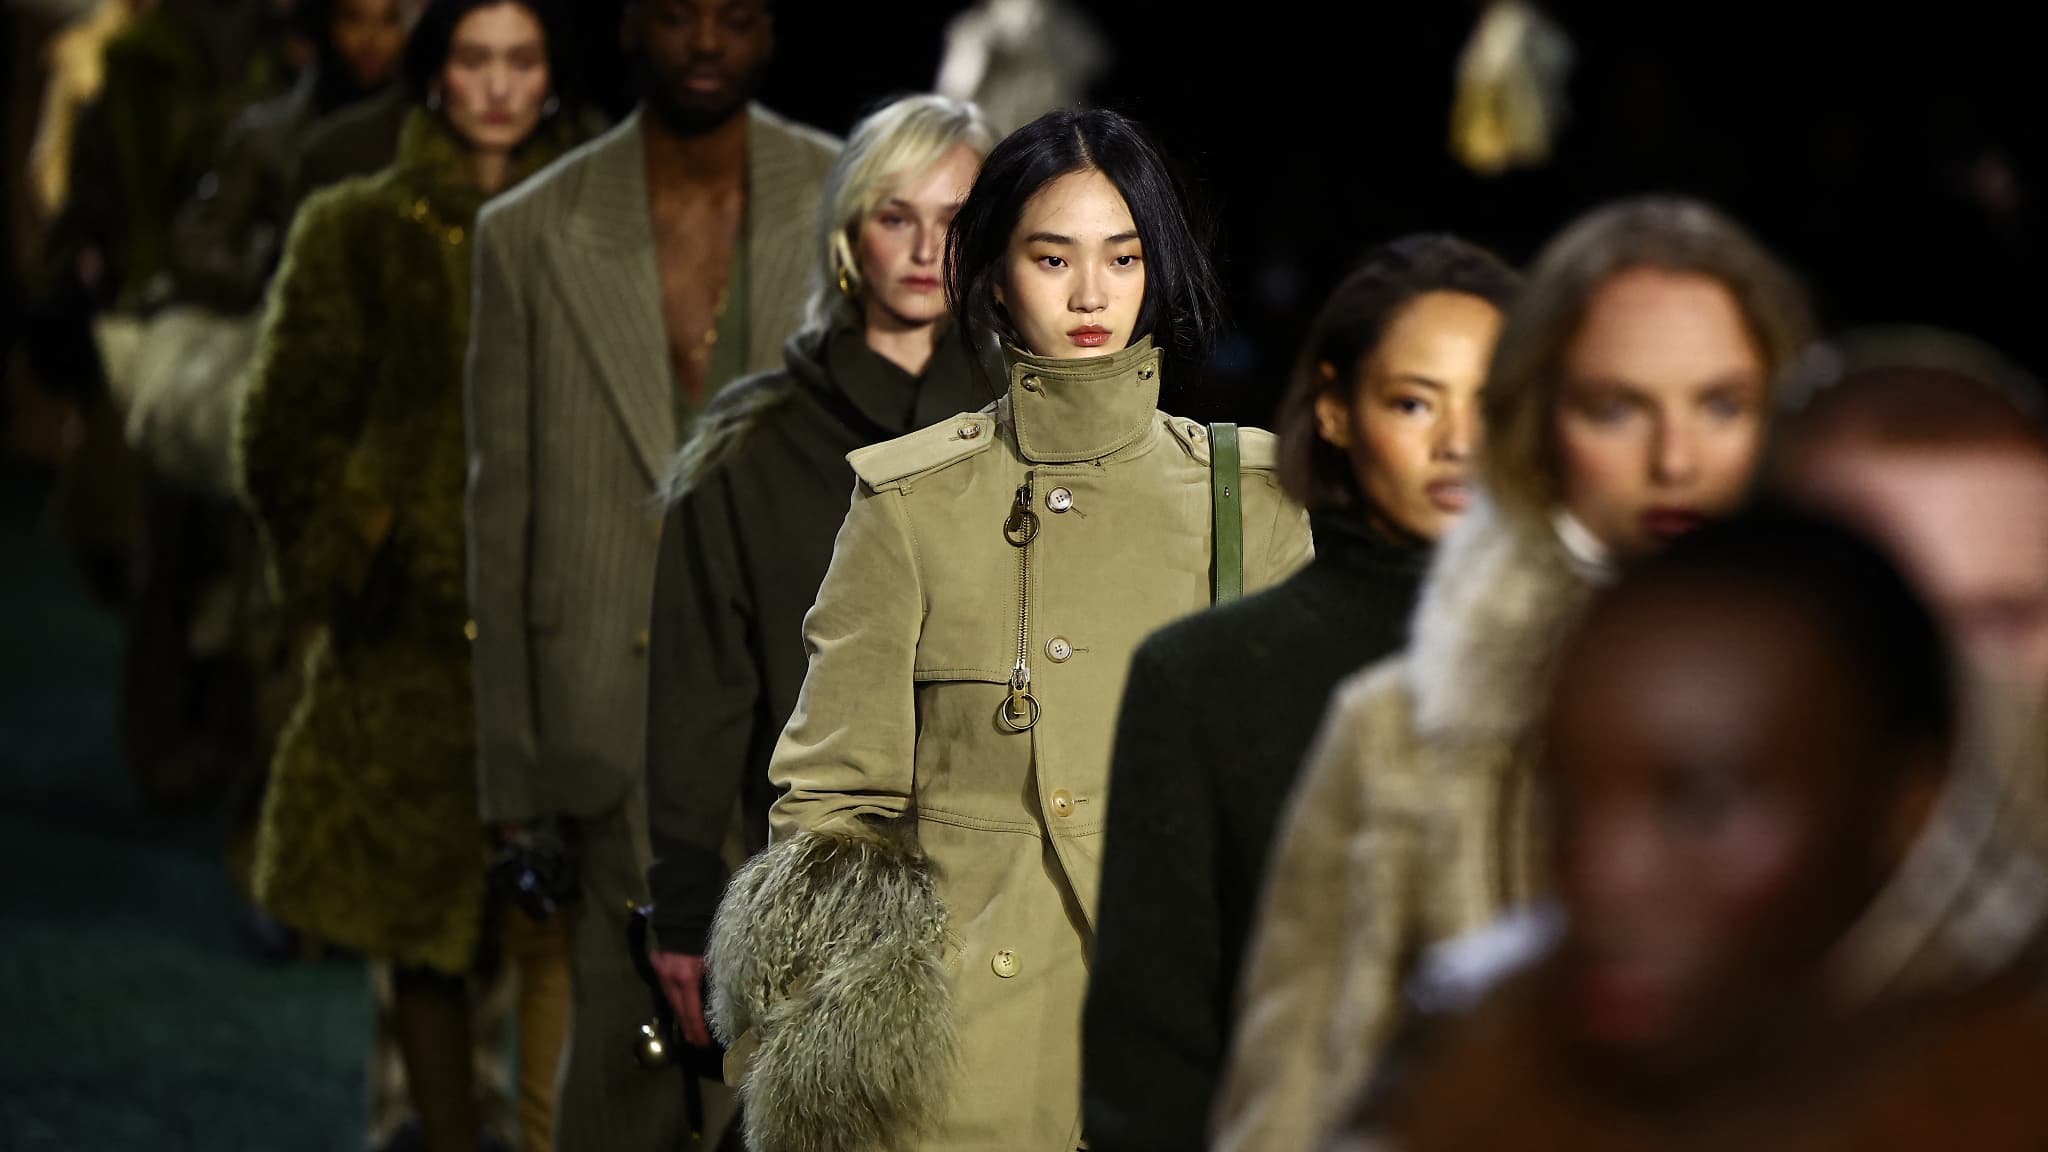 With plenty of trench coats and very British details, Burberry is showing off its style at London Fashion Week